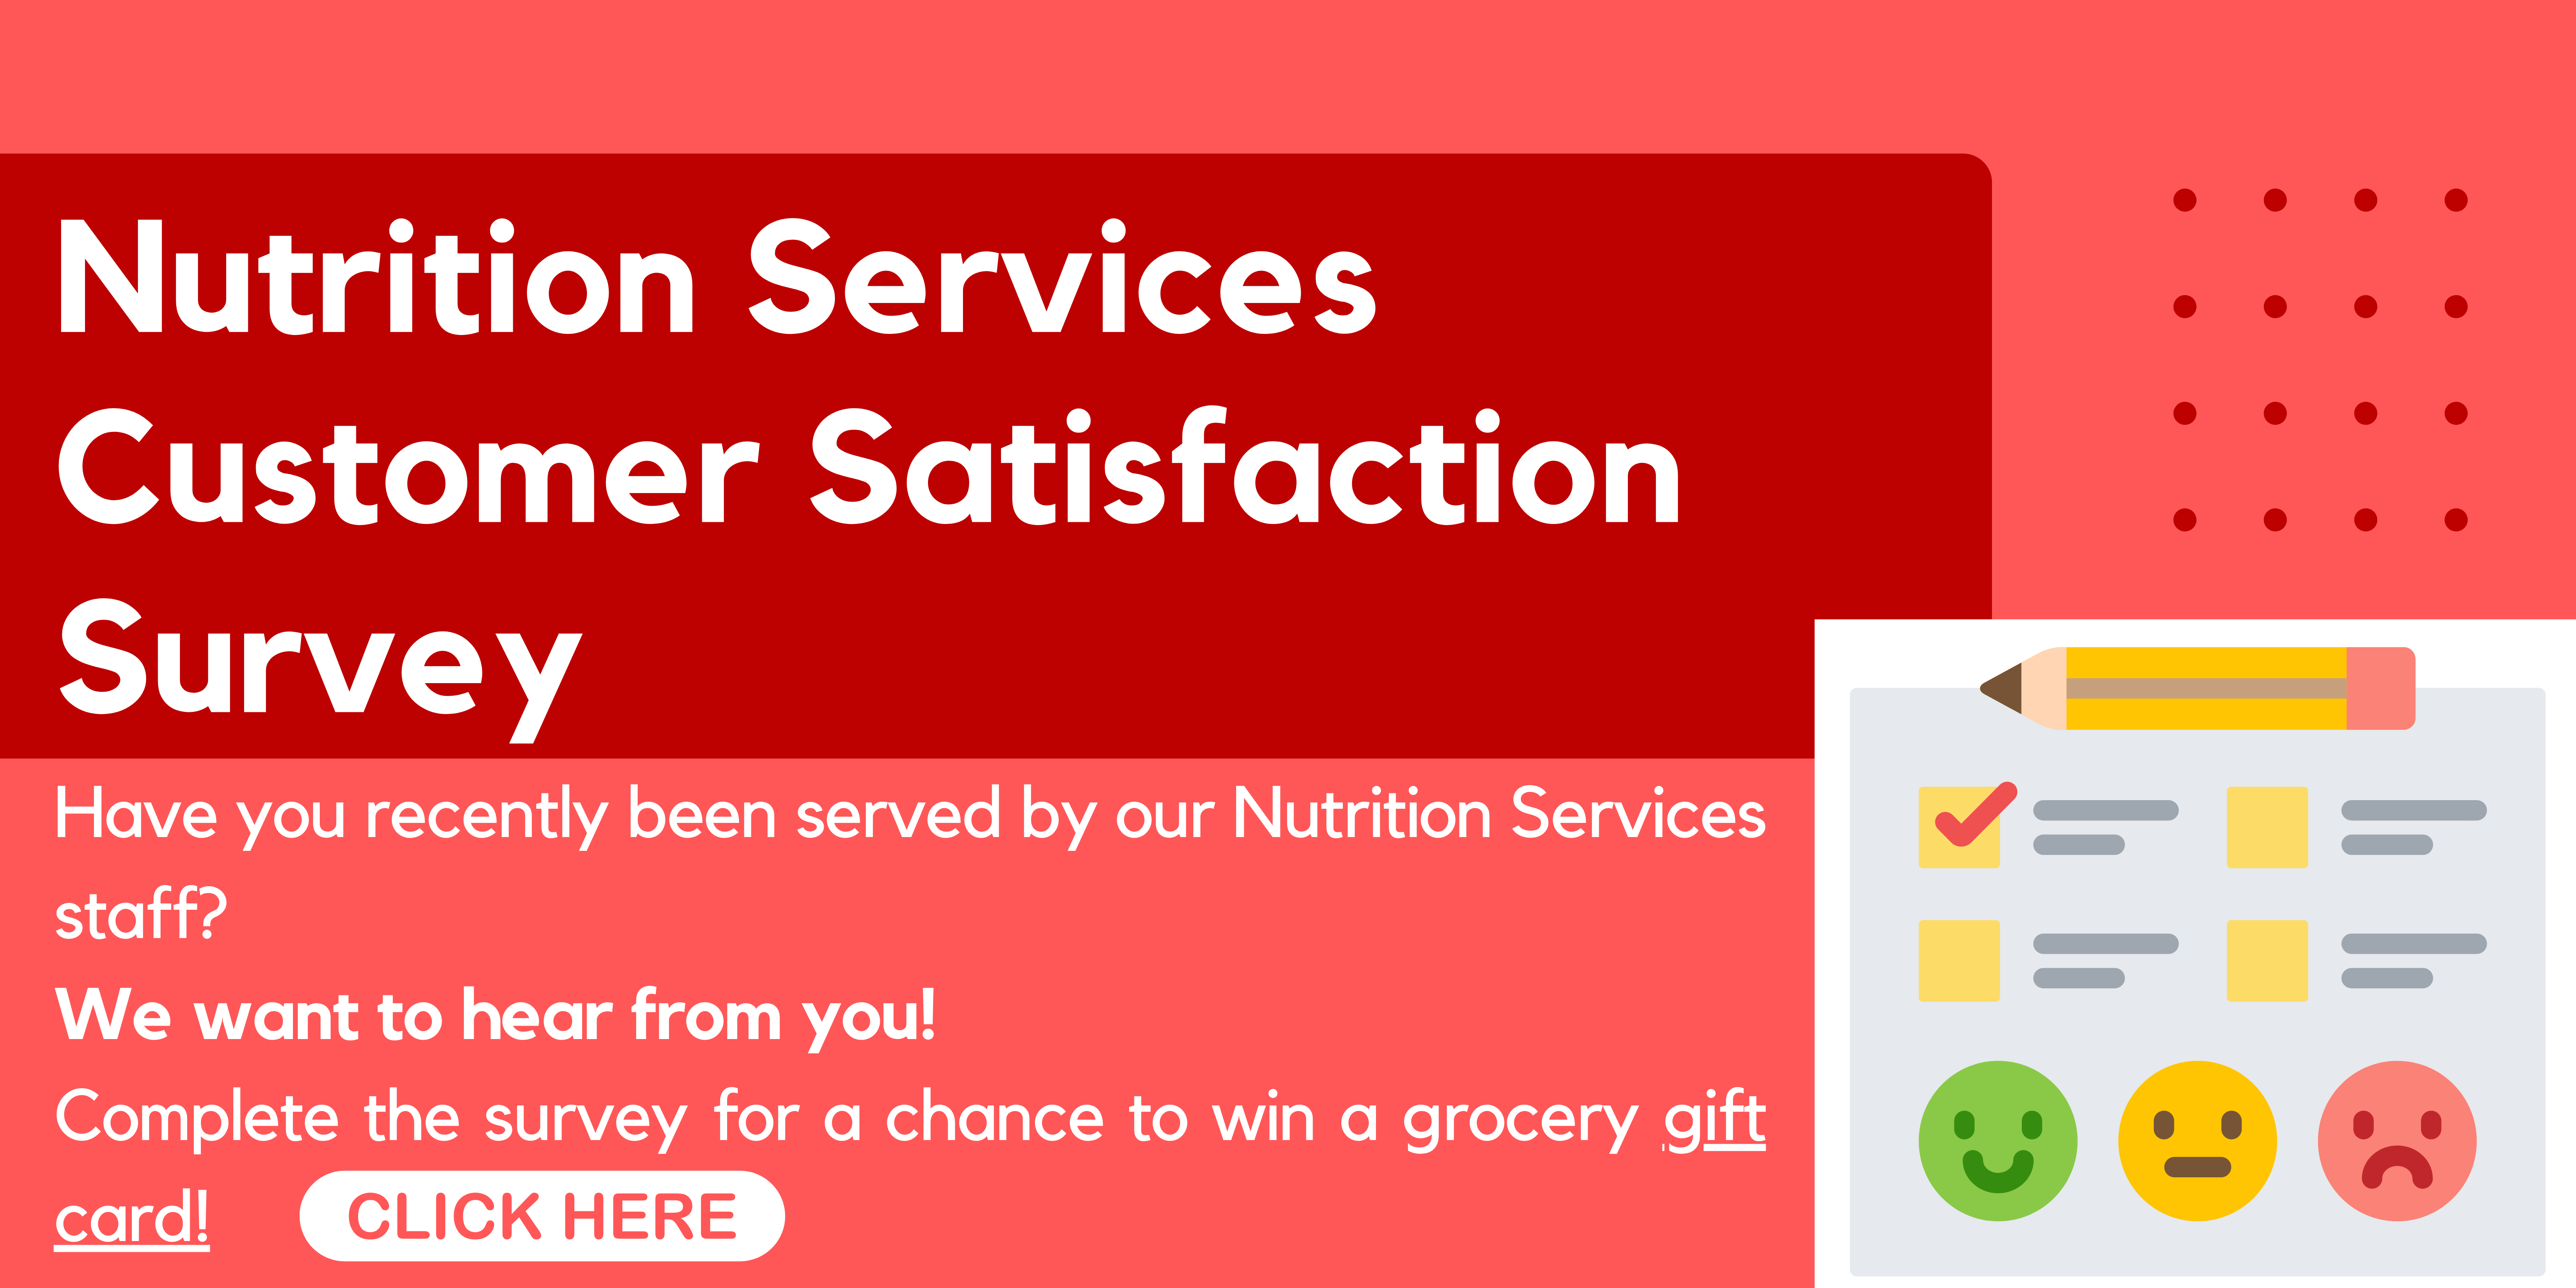 Nutrition Services Customer Satisfaction Survey: Have you recently been served by our Nutrition Services staff? We want to hear from you! Complete the survey for a chance to win a grocery gift card